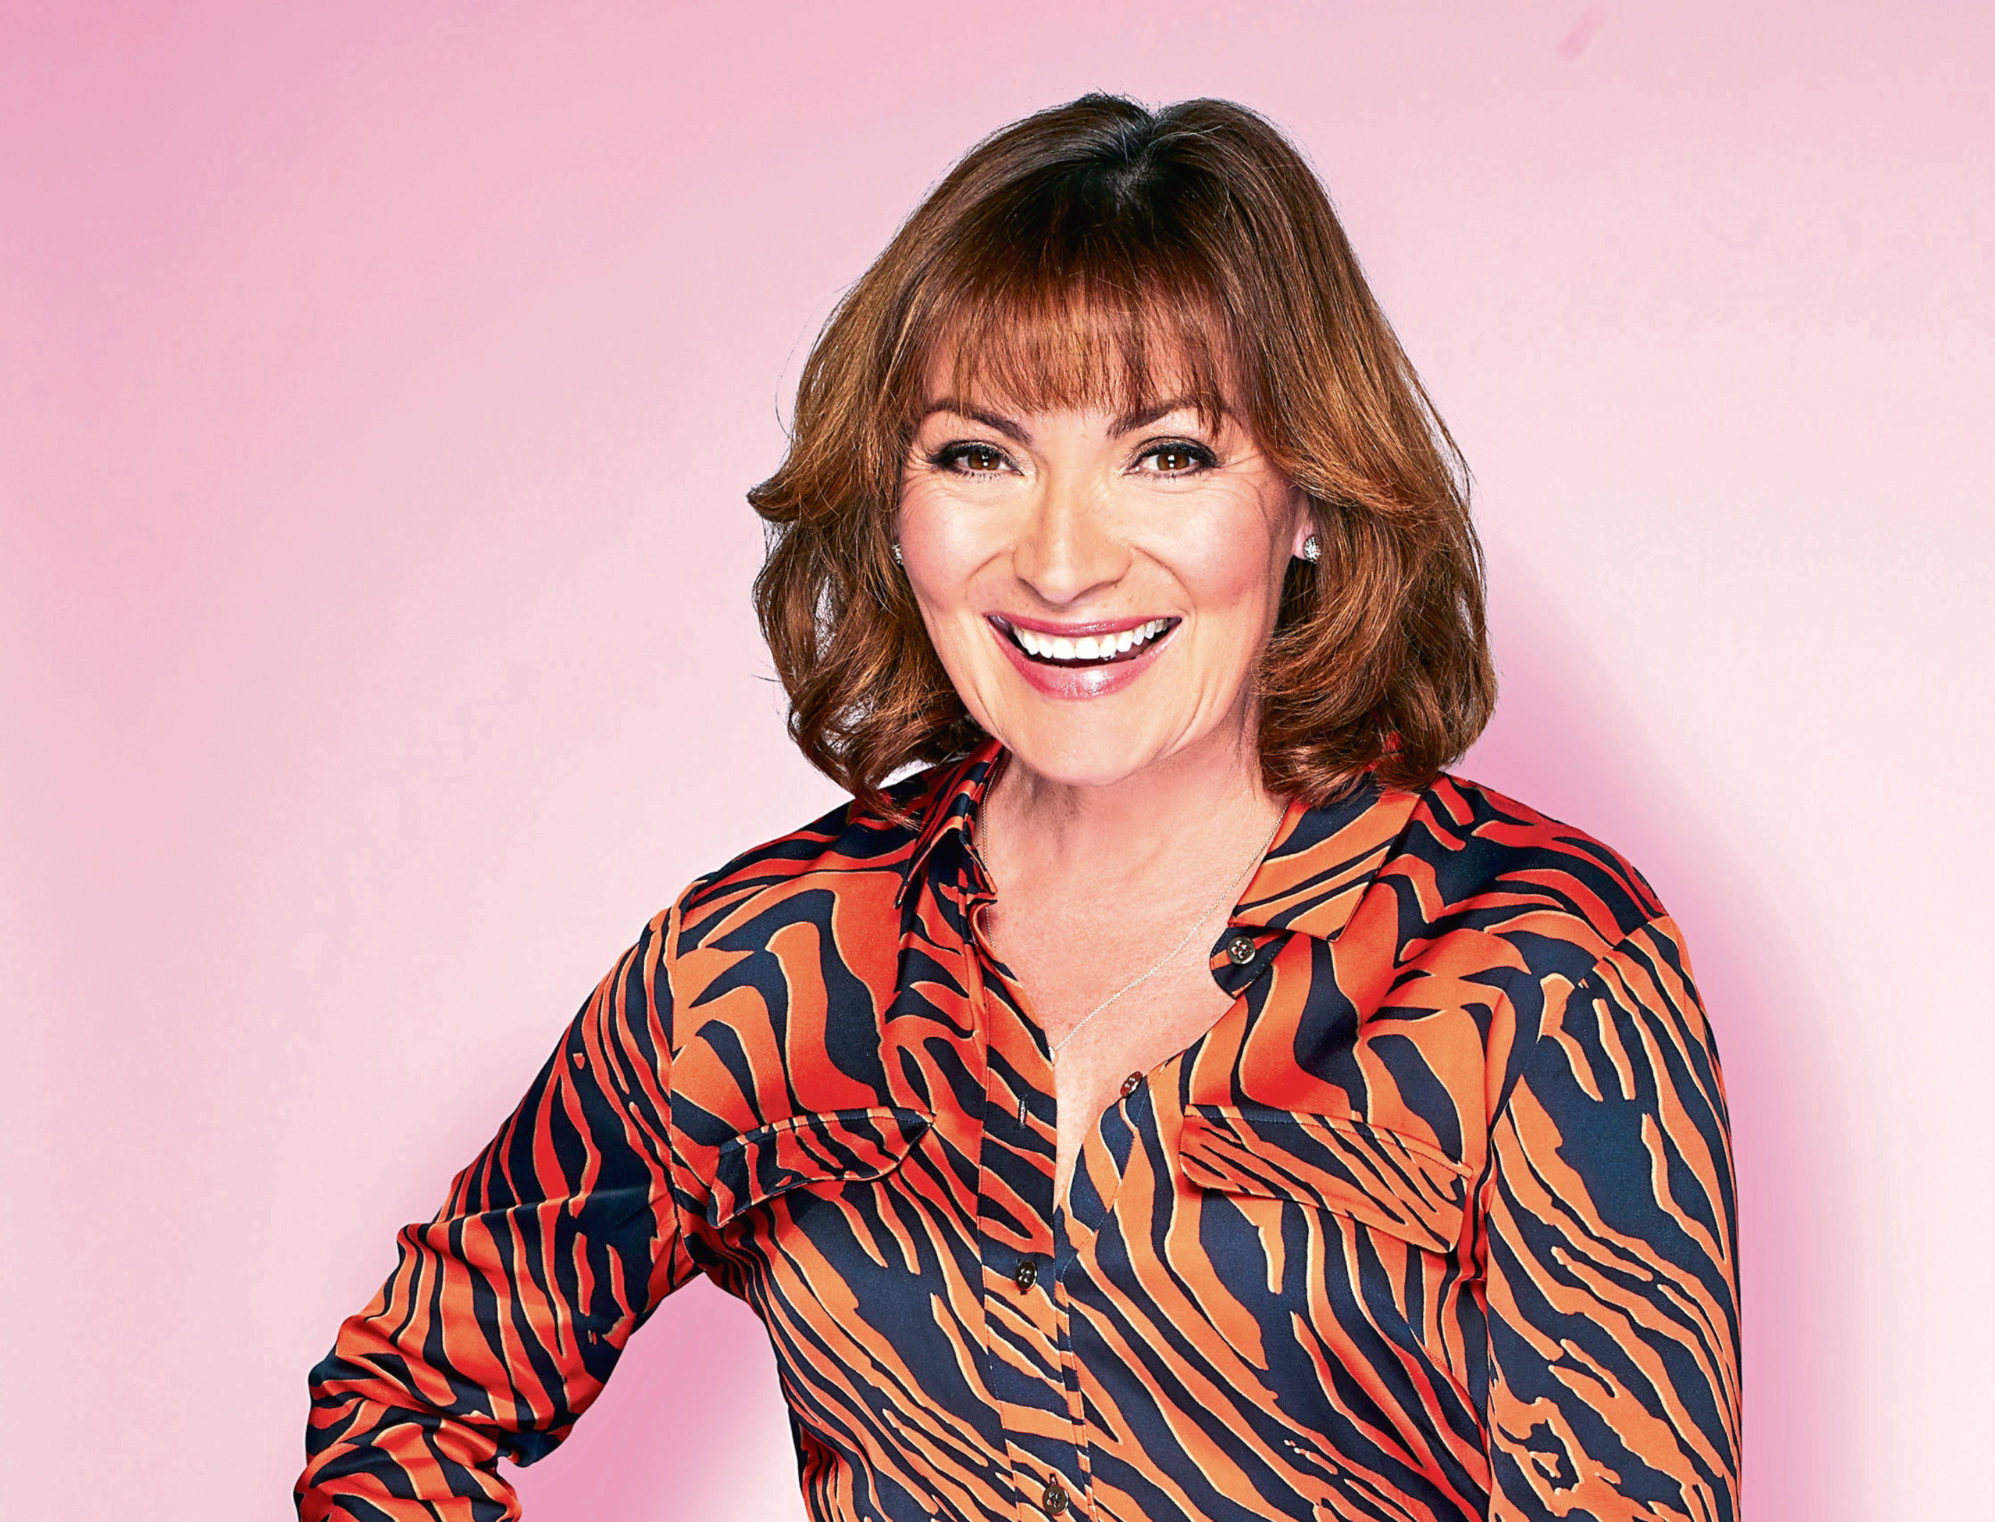 Lorraine Kelly At 60 Keep Smiling Through Lifes Struggles The 6310